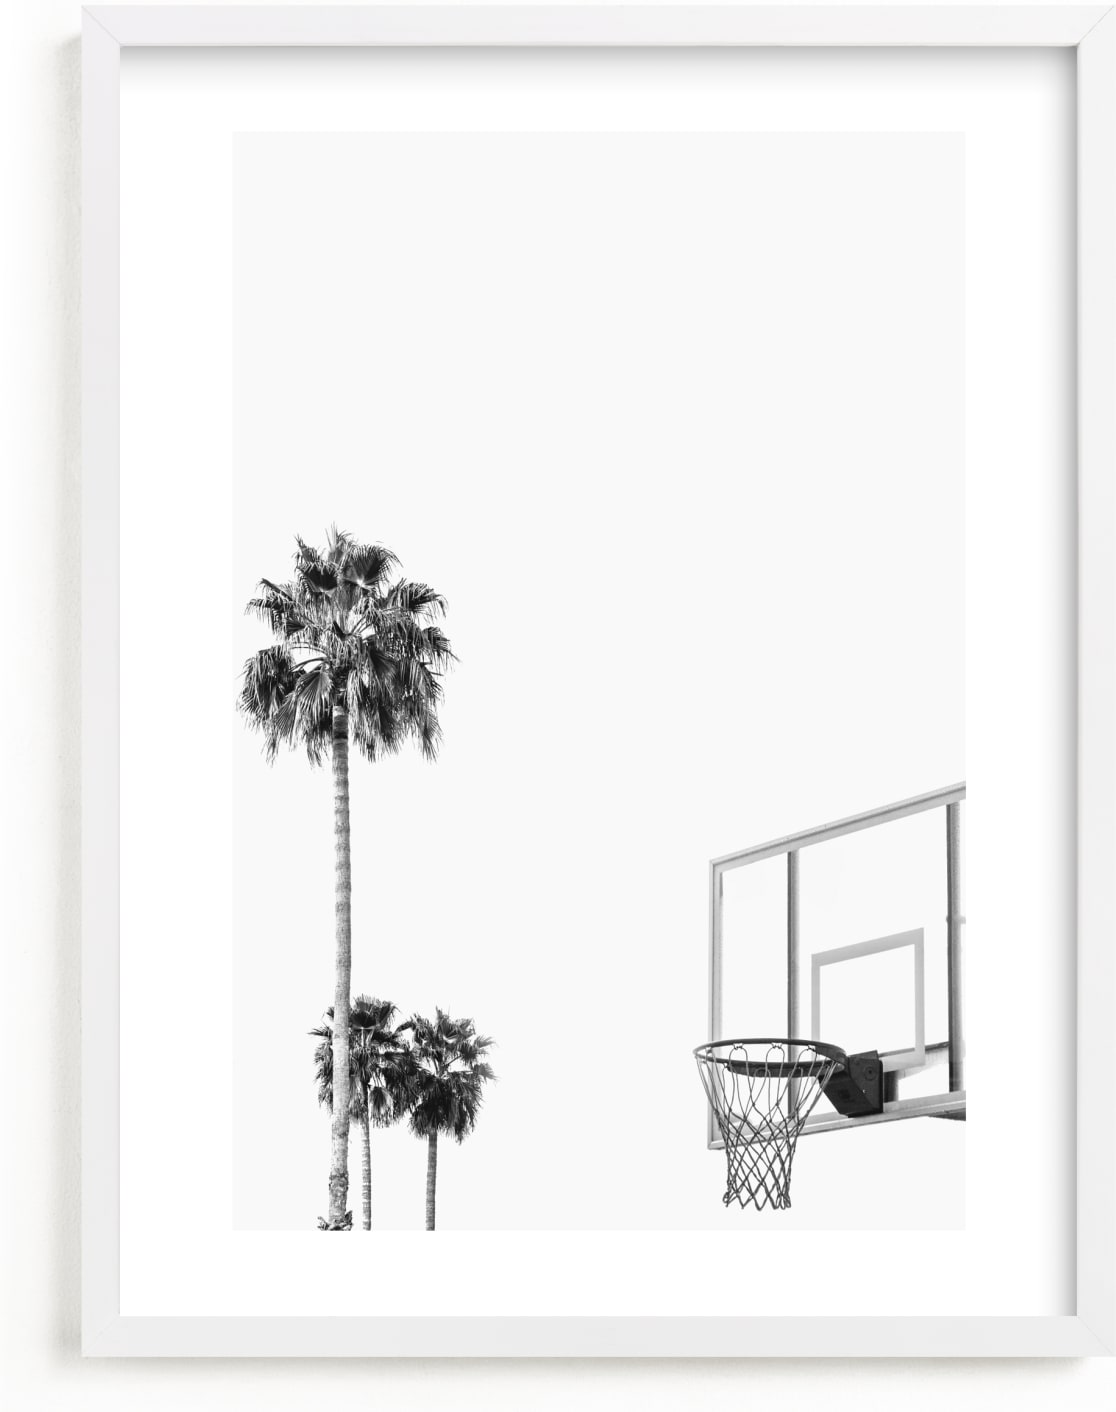 This is a black and white art by Irene Suchocki called Hoops and Palms.